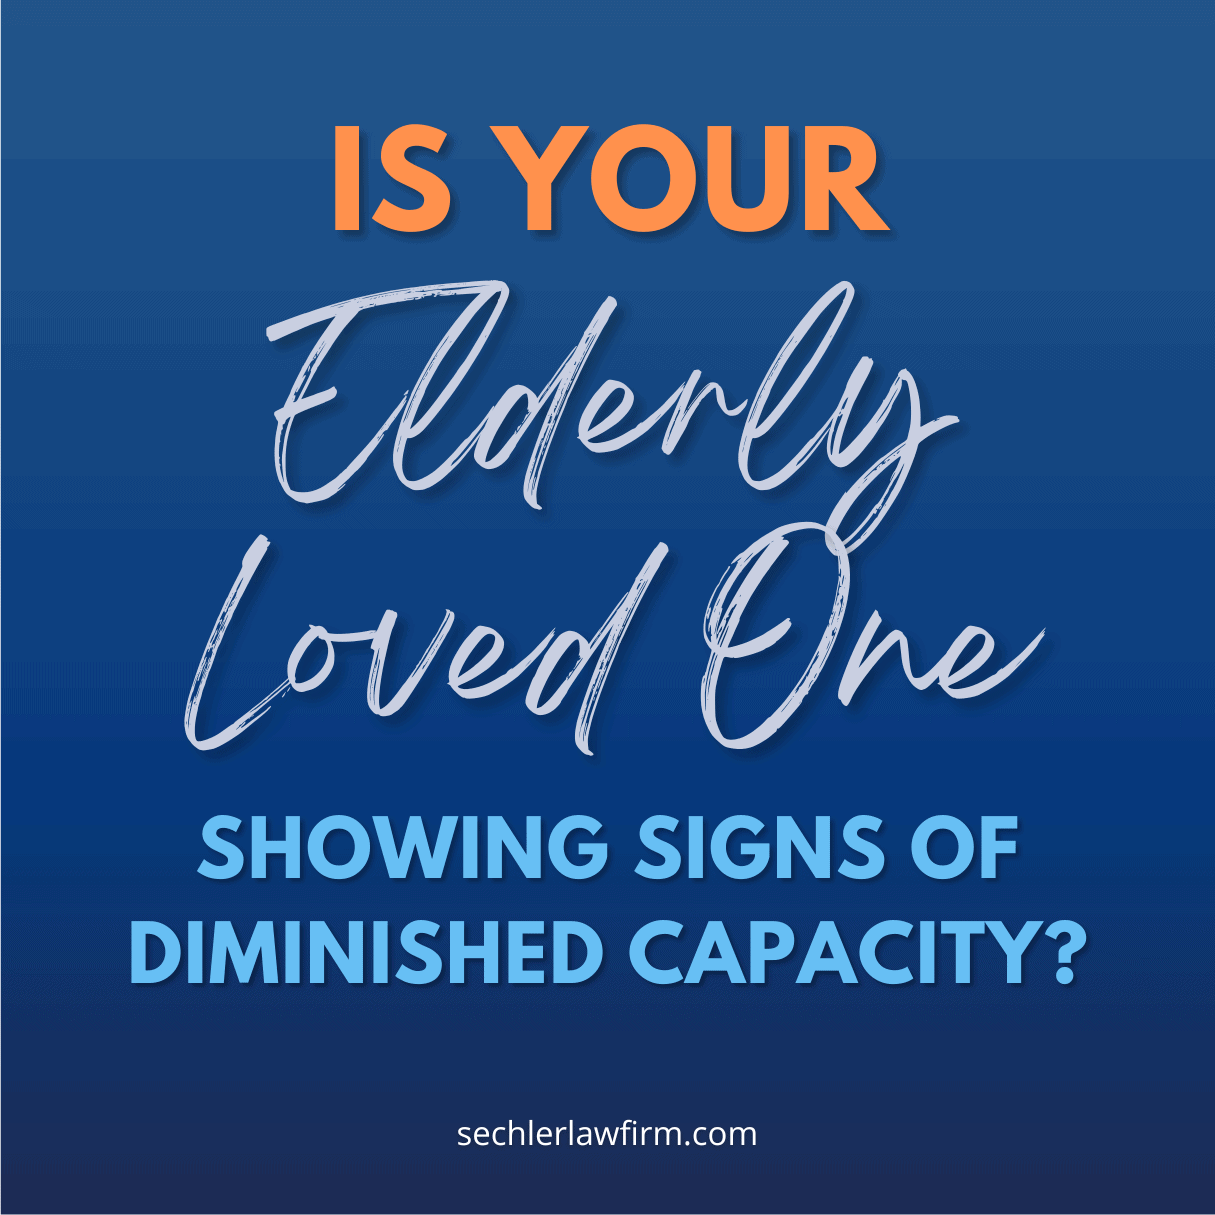 Is Your Elderly Loved One Showing Signs of Diminished Capacity?